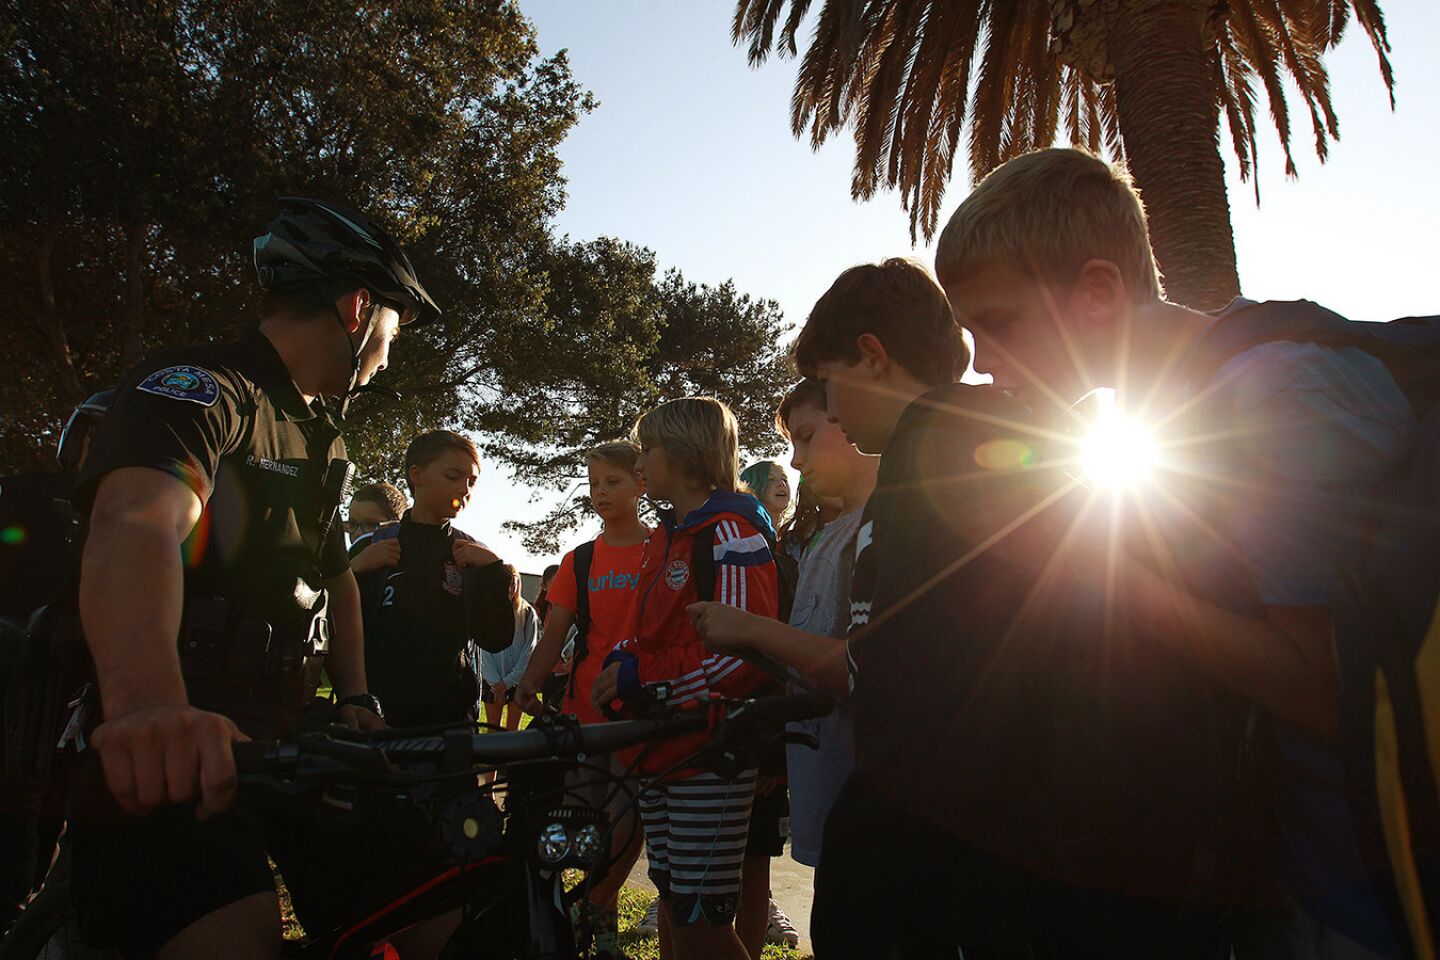 Photo Gallery: Kaiser Elementary students participate in Walk to School Day